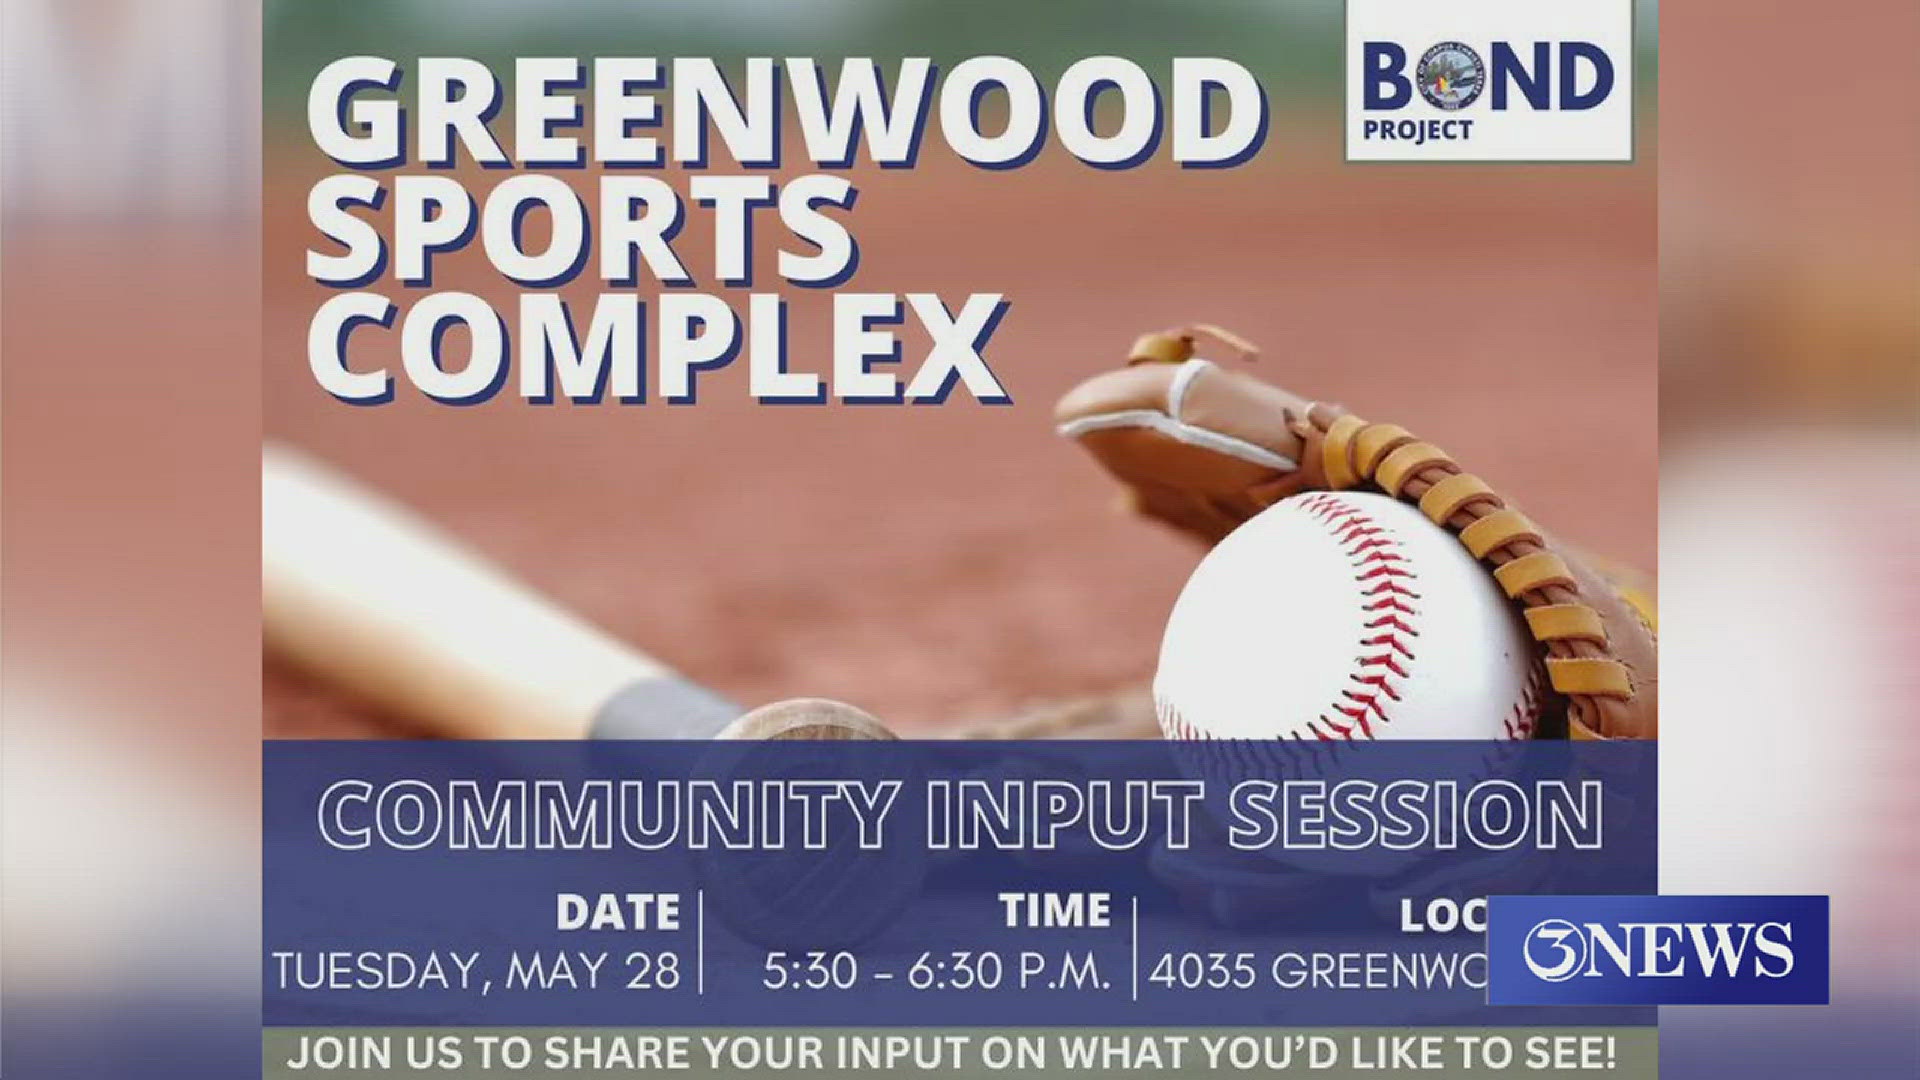 If you want to share your thoughts on what YOU think would make the sports area better, mark your calendar and remember to head to the community meeting on Tuesday,